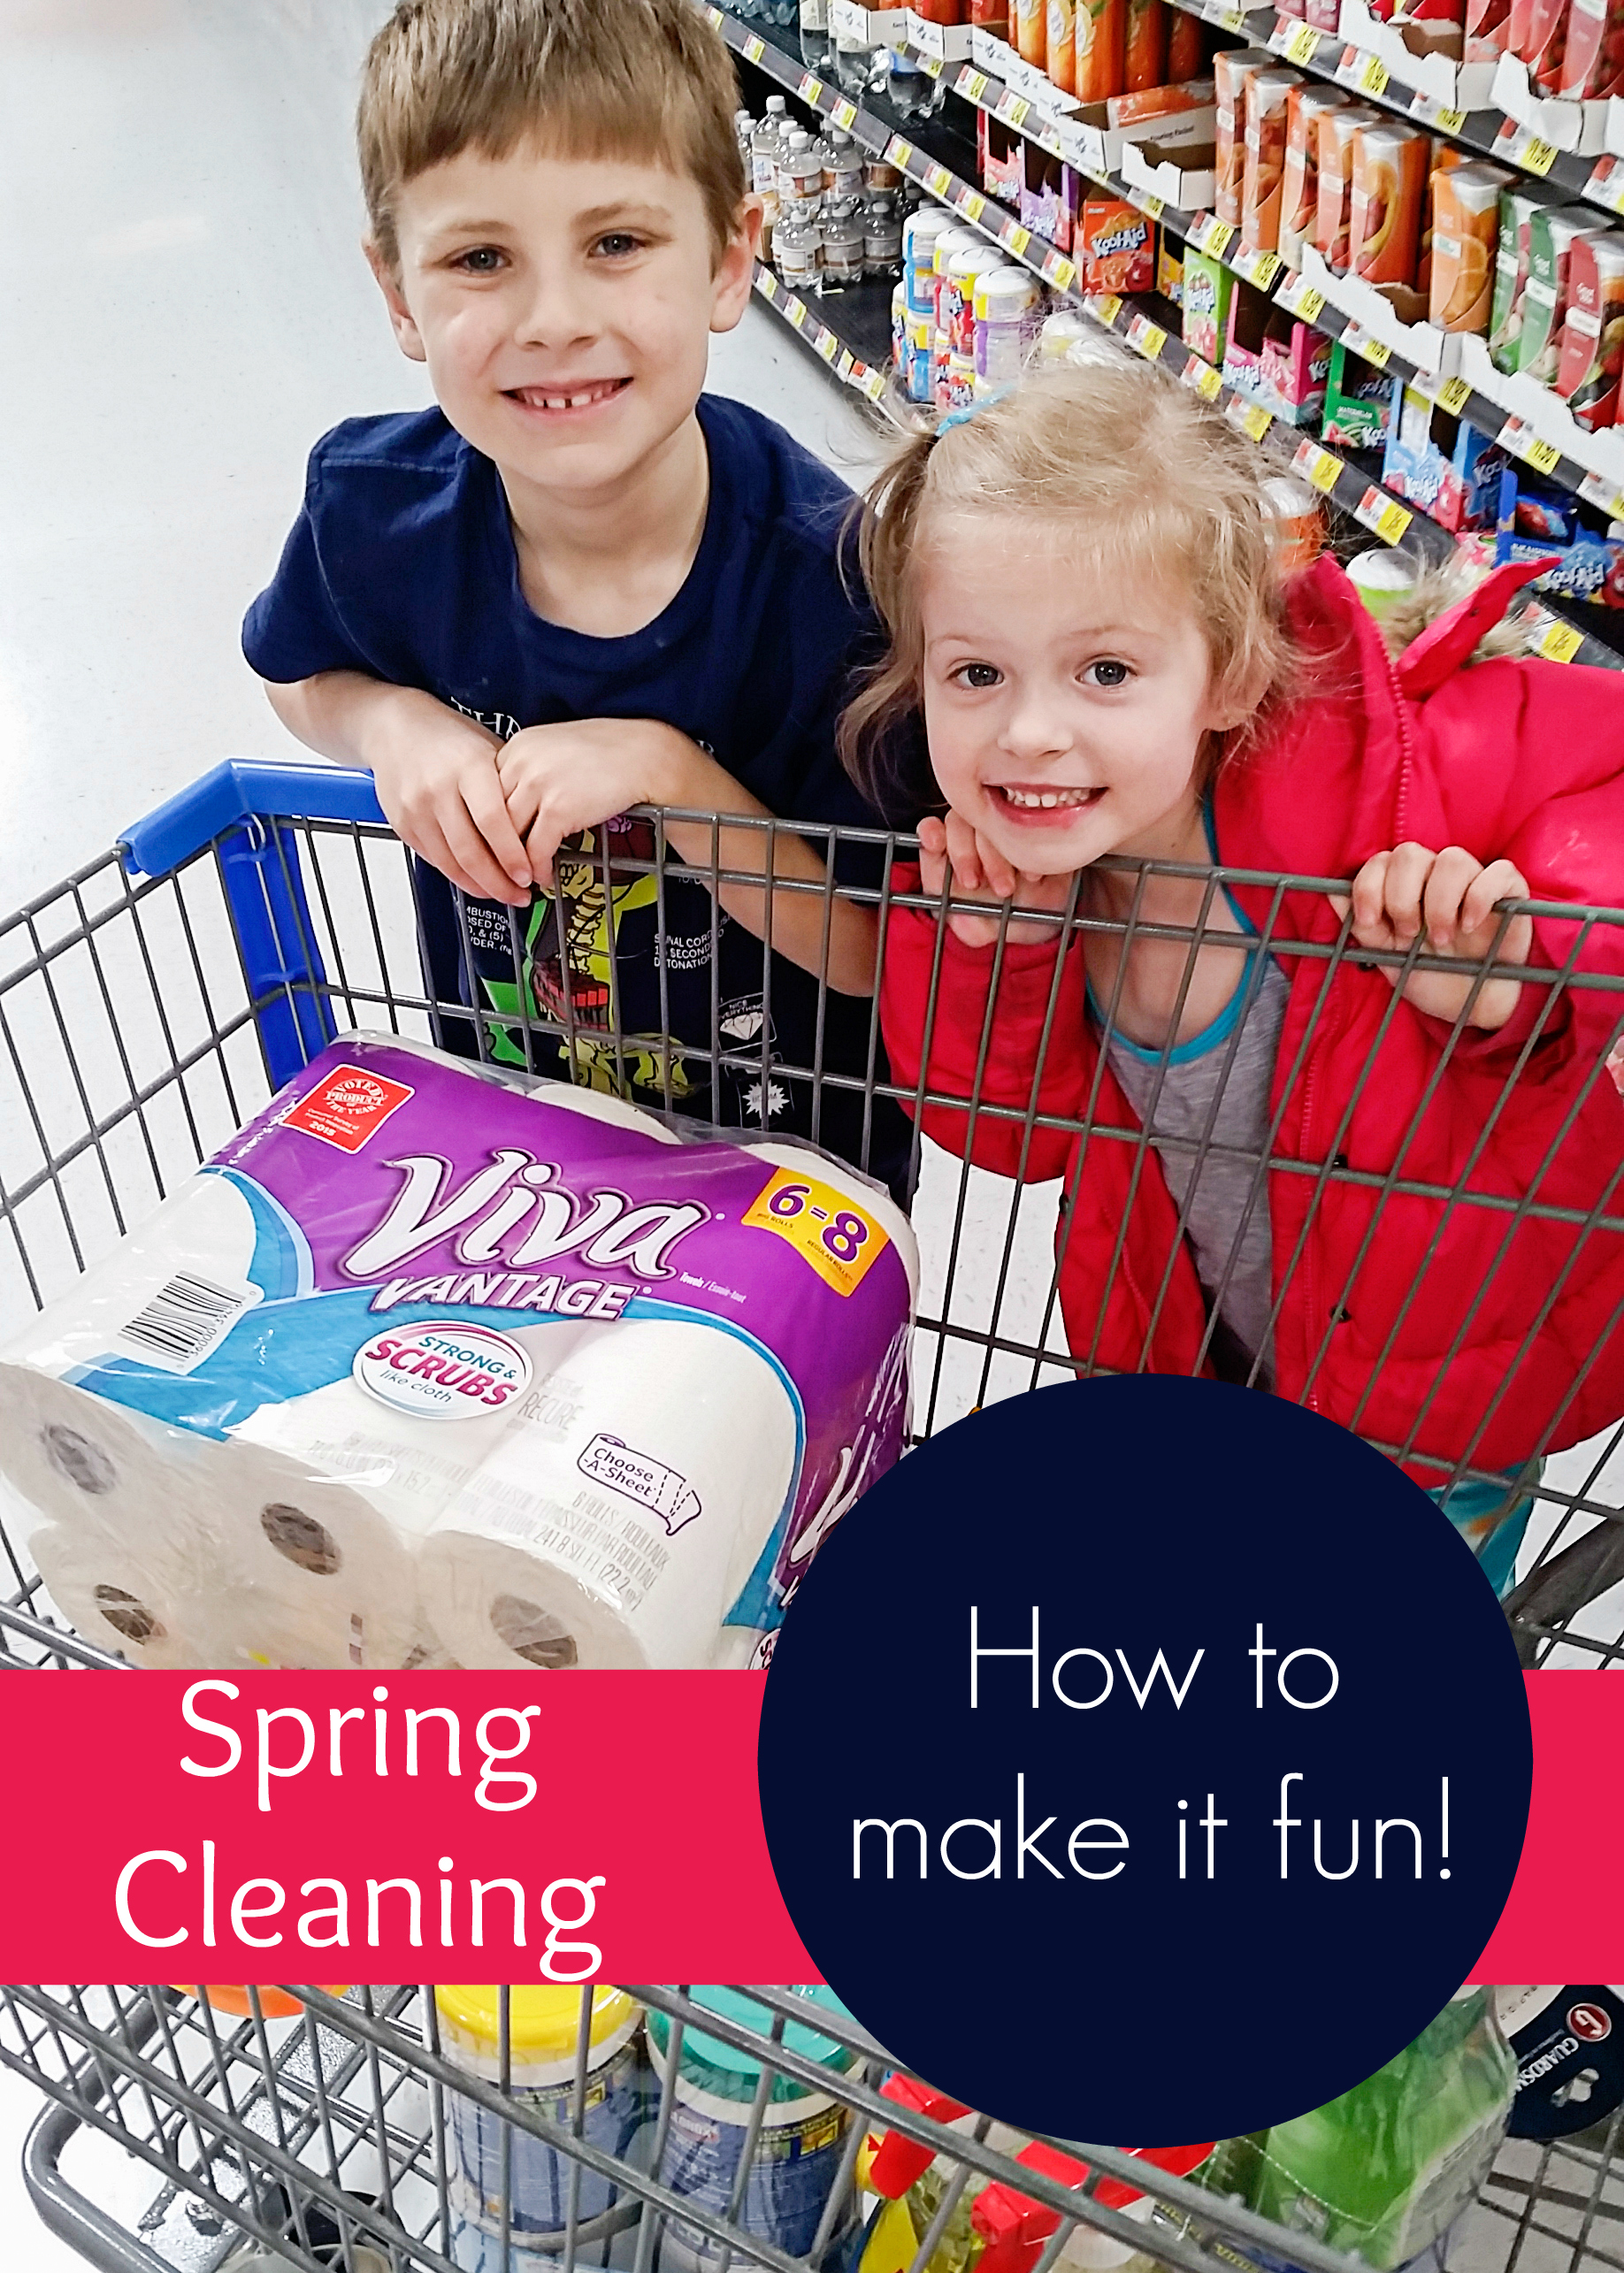 How I Make Spring Cleaning Fun for the Kids!